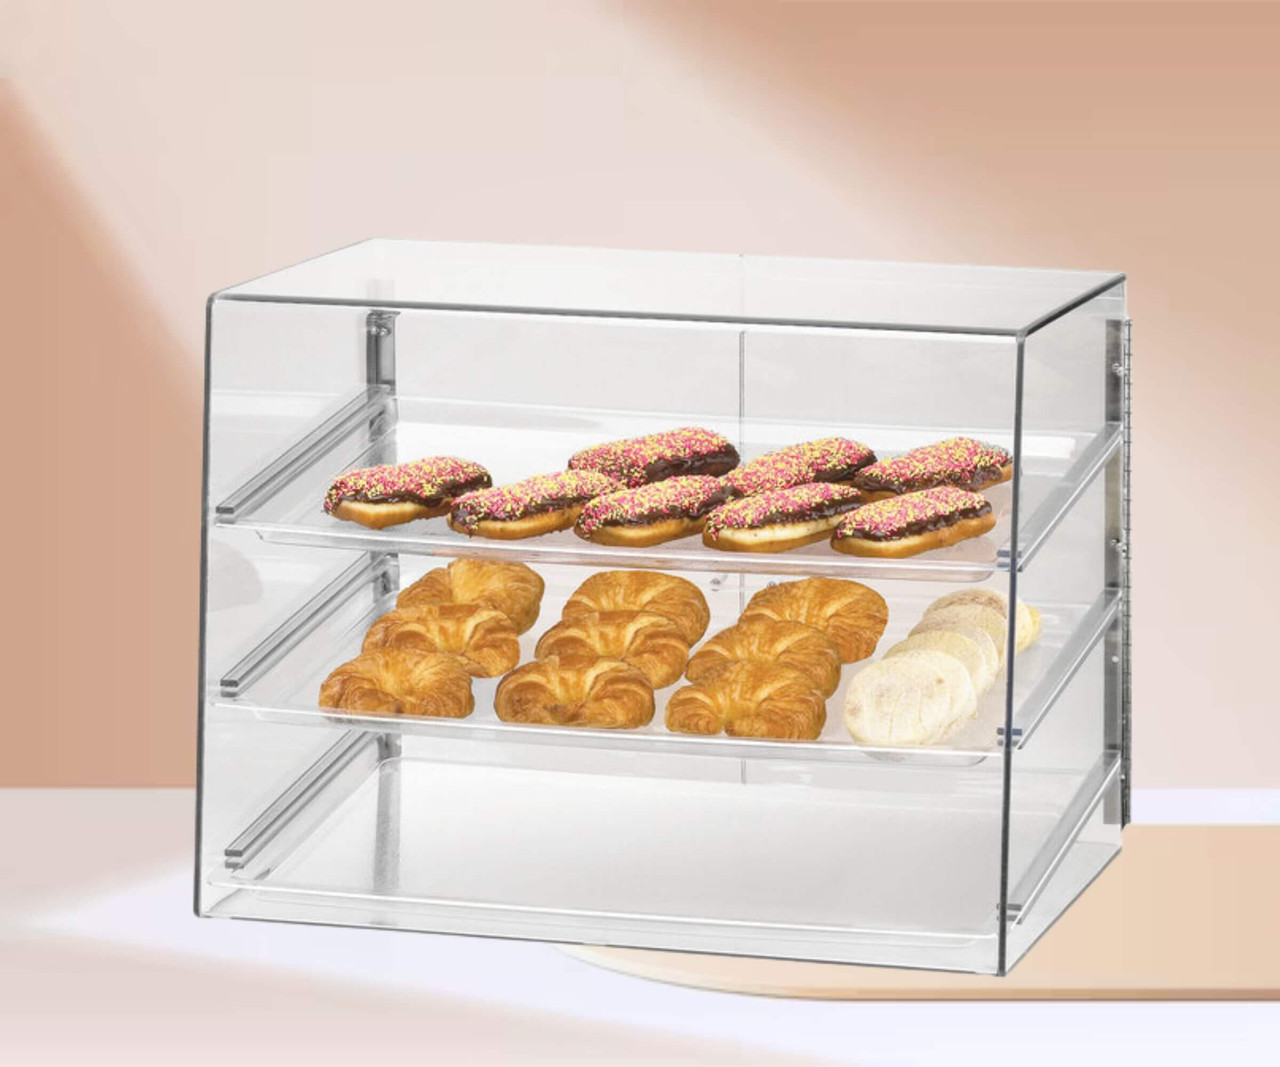 Cal-Mil Classic 27" x 20" x 20" Three Tier Pastry Display Case with Rear Door-Chicken Pieces